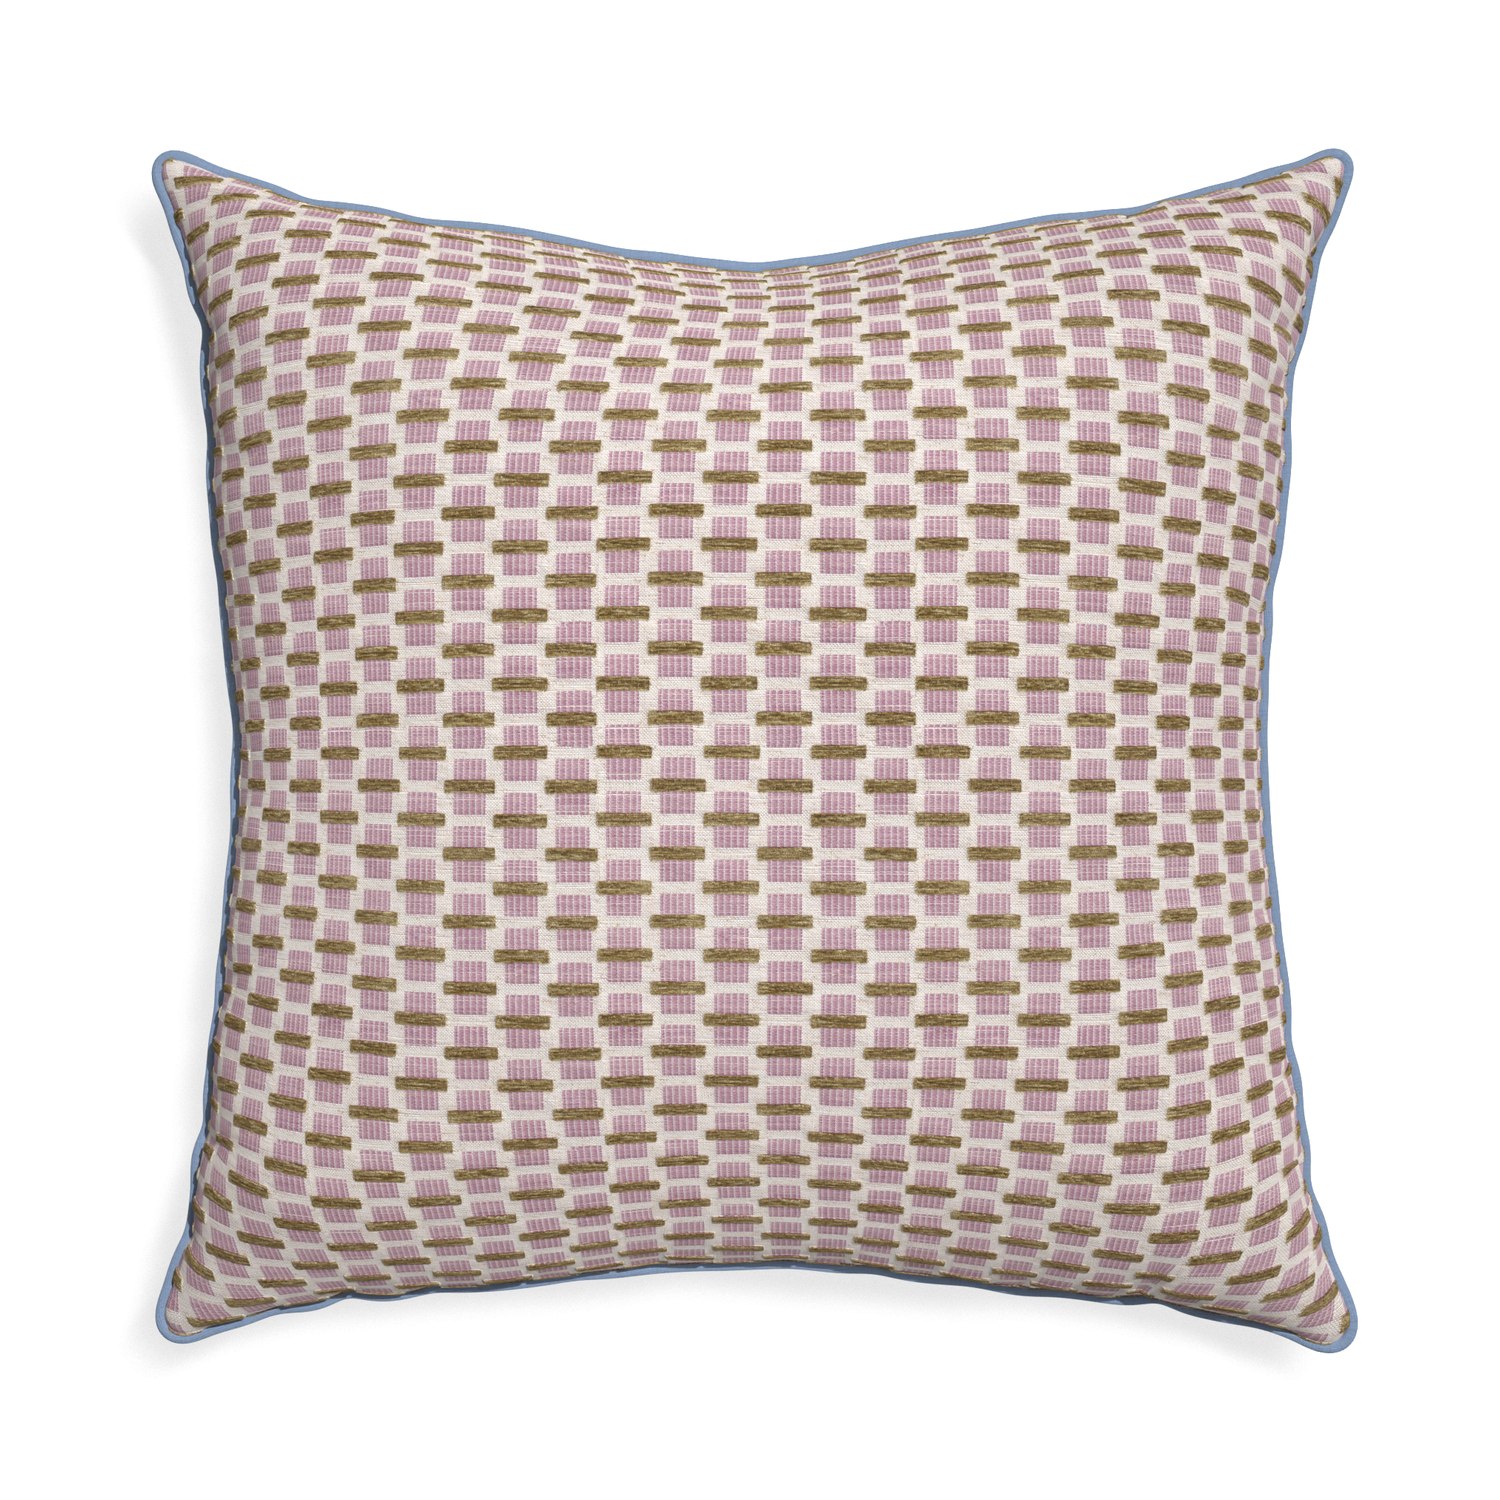 Euro-sham willow orchid custom pink geometric chenillepillow with sky piping on white background